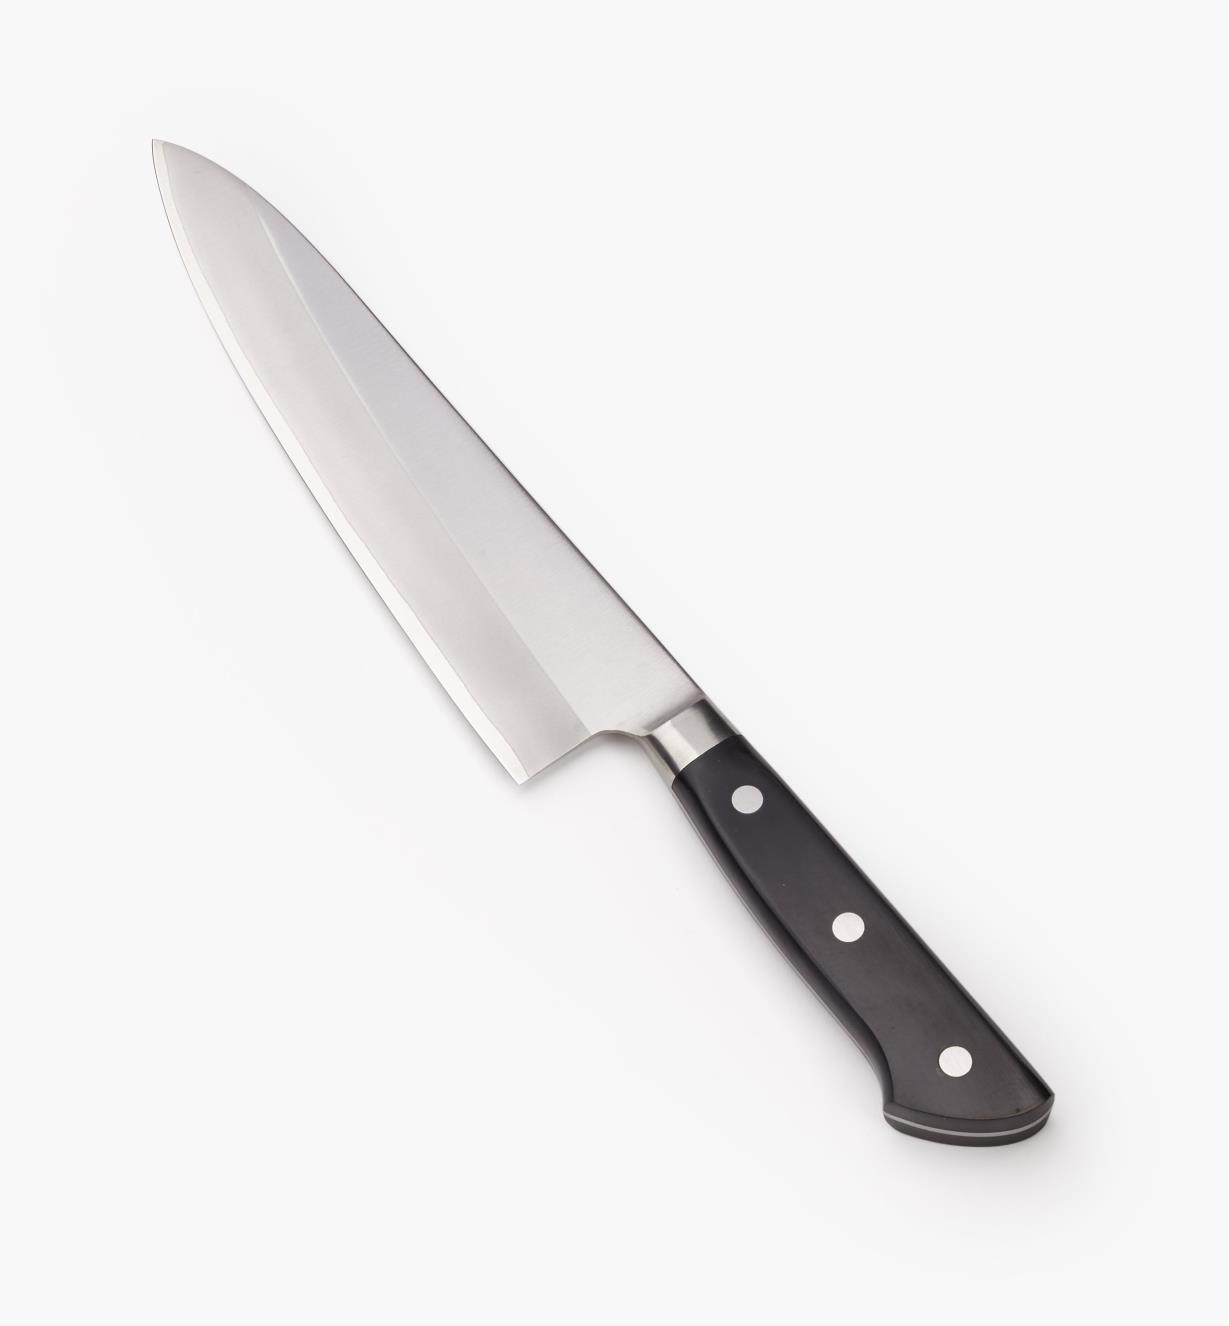 60W0502 - 210mm (8 1/4") Chef's Knife*